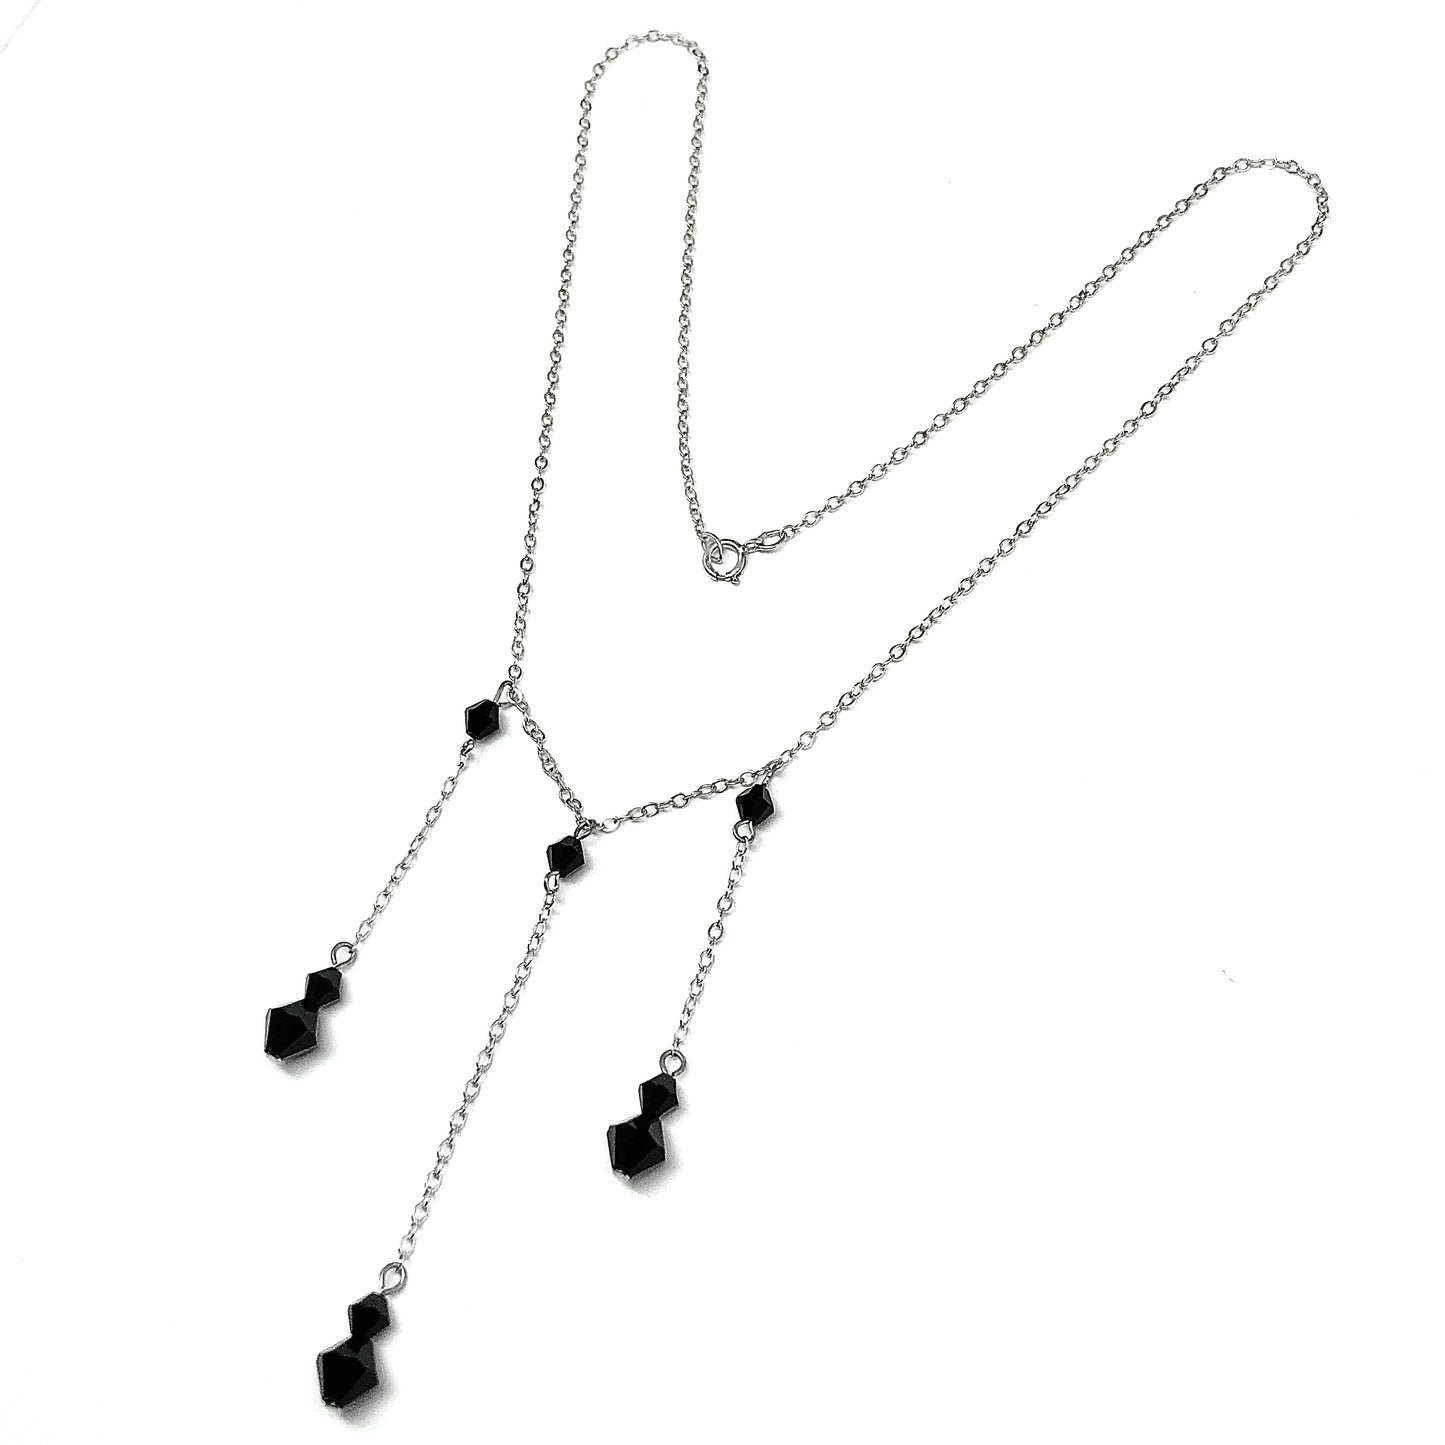 Stylish 16in Sterling Silver Black Bead Station Y Chain Tassel Necklace